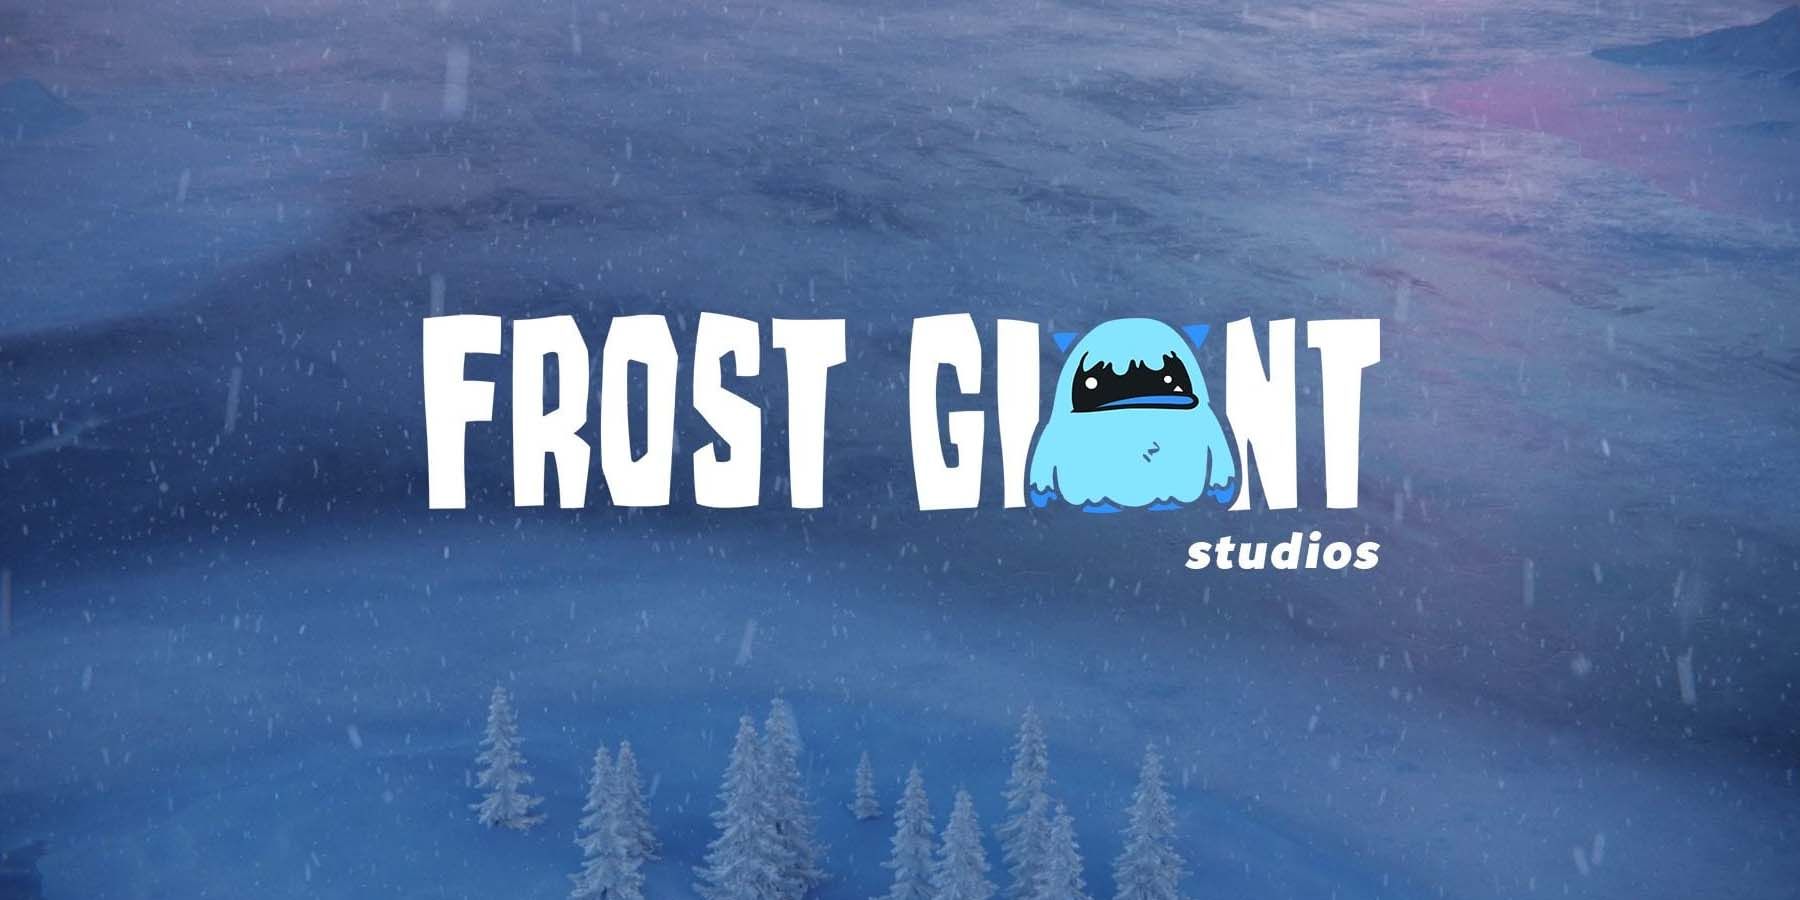 Former Blizzard Dev Studio Frost Giant Revealing New RTS Title at the ...